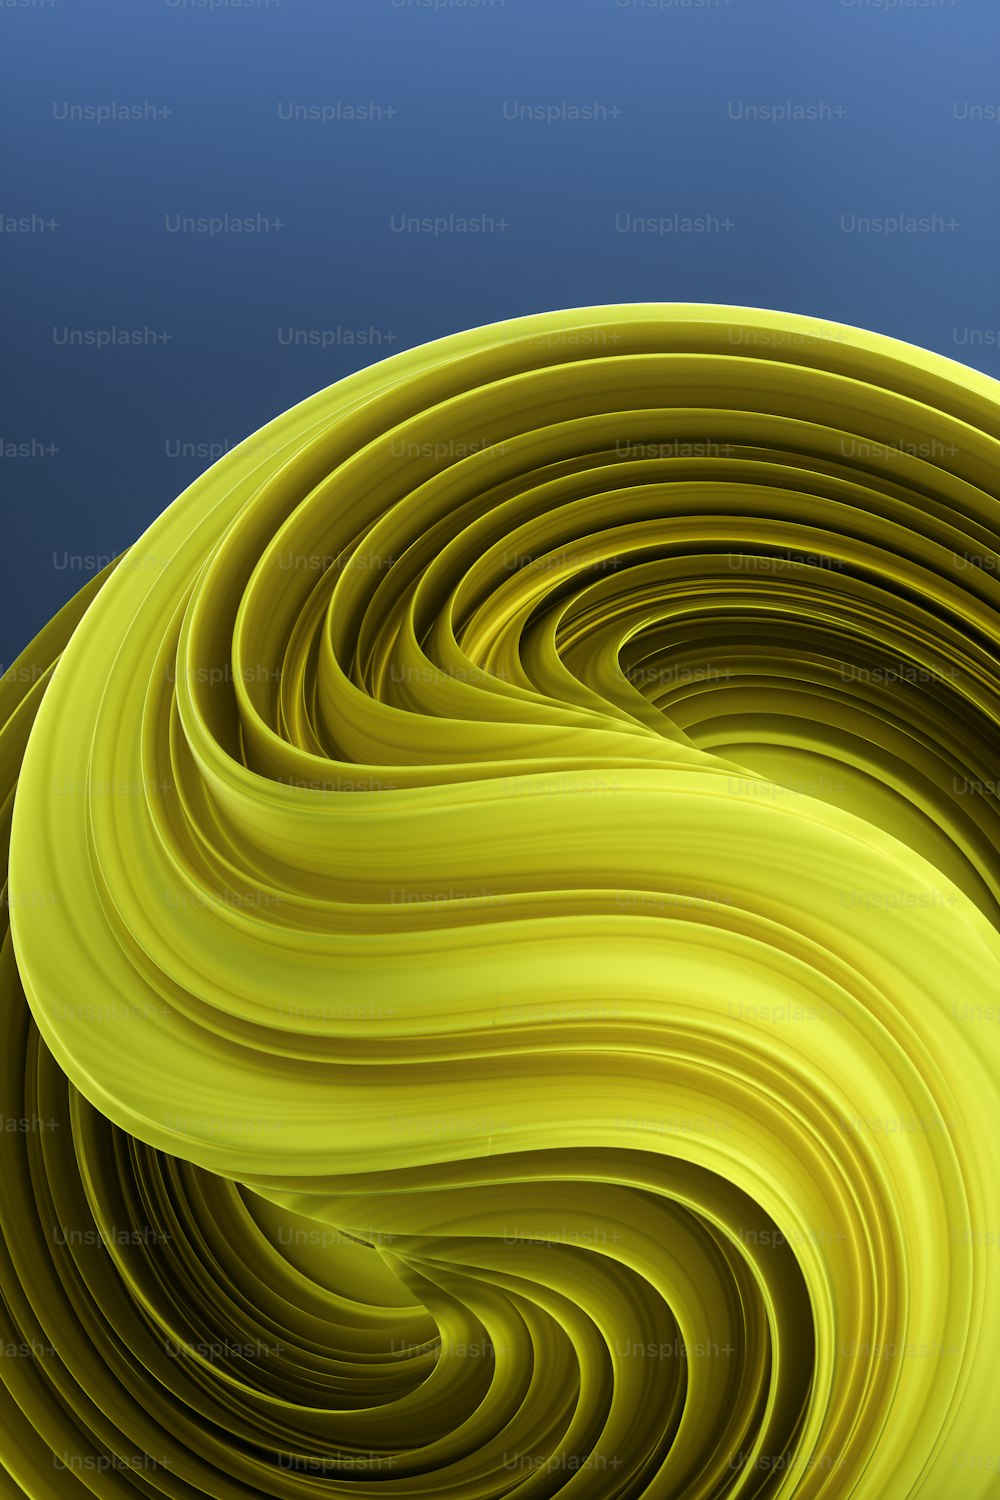 a computer generated image of a curved yellow object